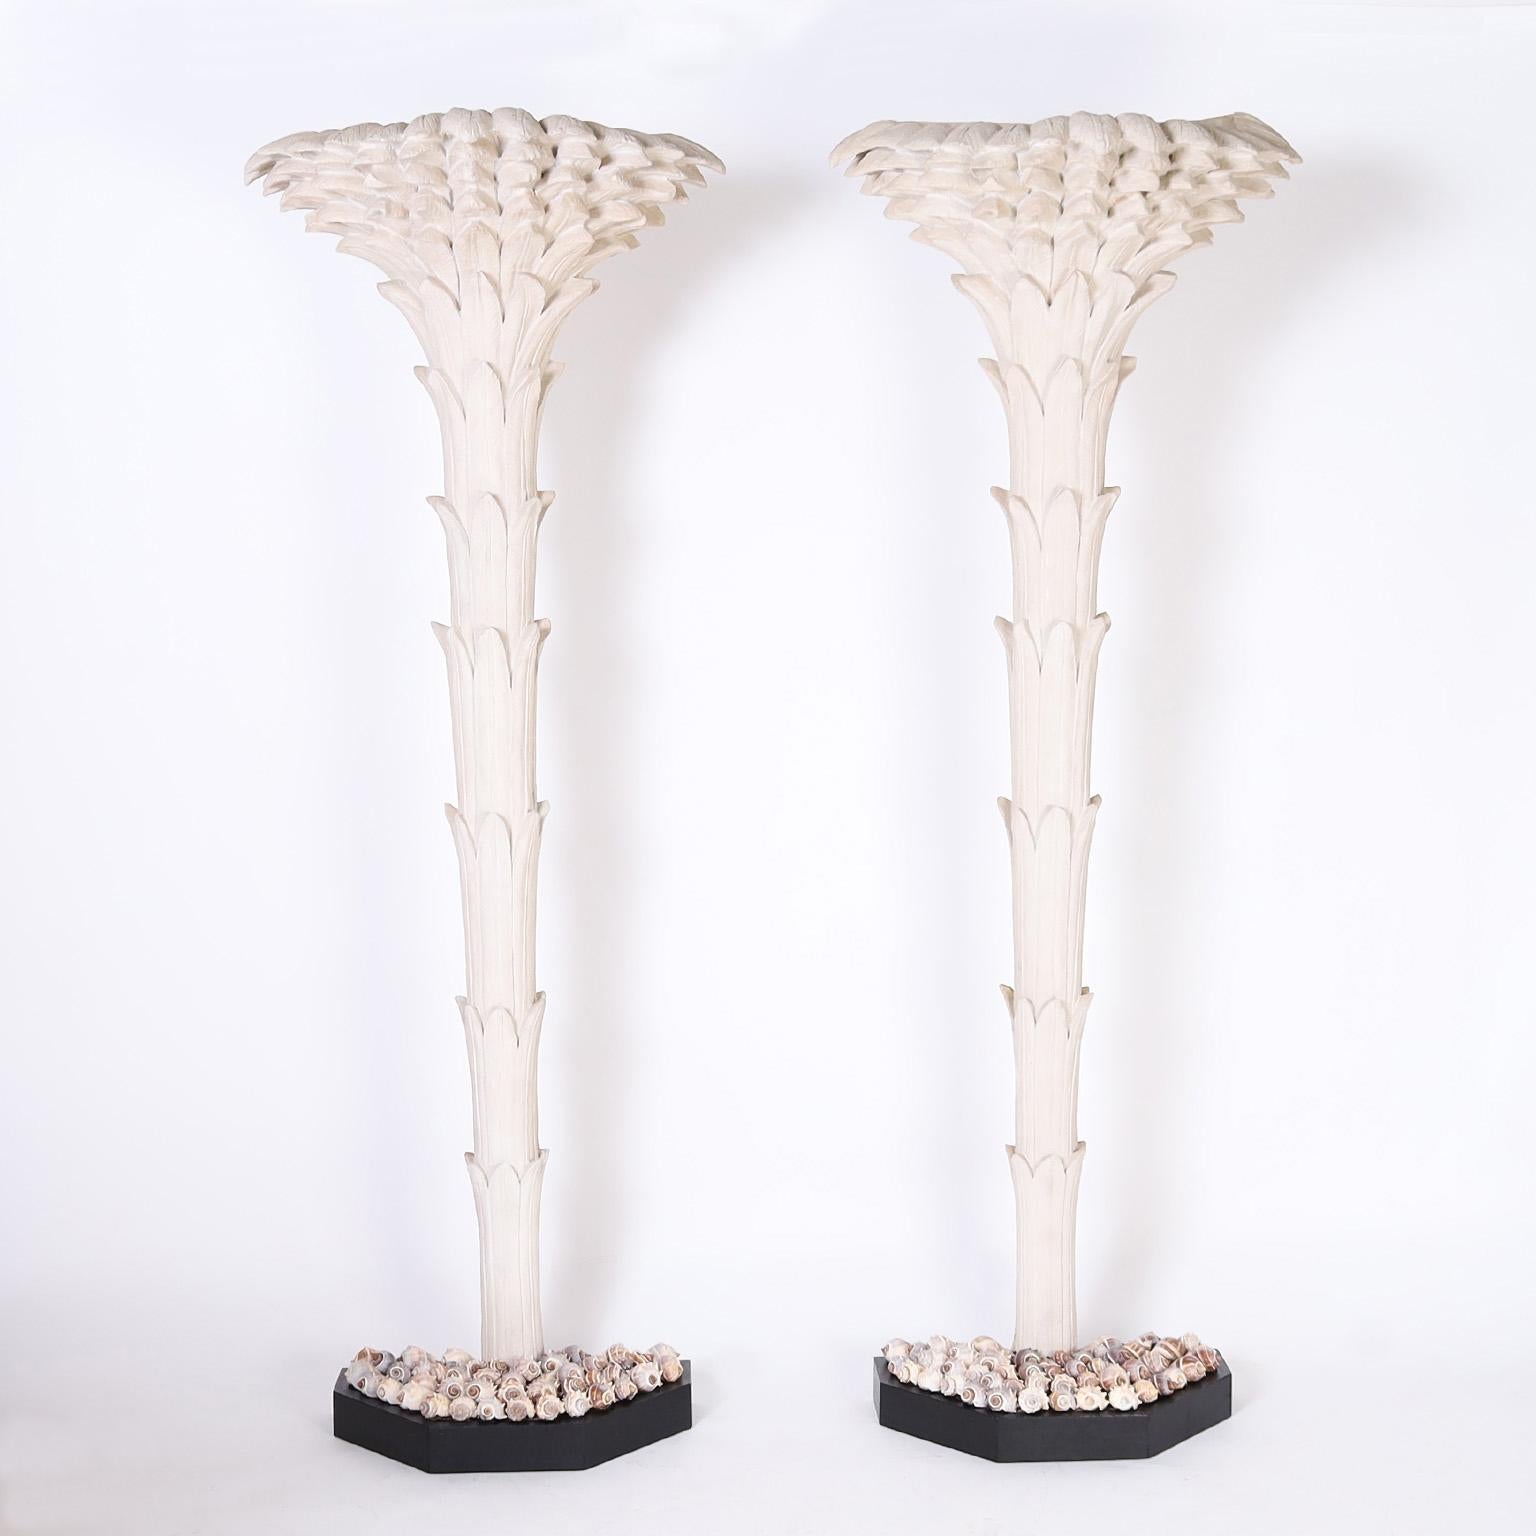 In vogue pair of mid-century stylized palm tree sculptures crafted in cast fiberglass. Painted in an off white finish and presented in faux planters filled with seashells.